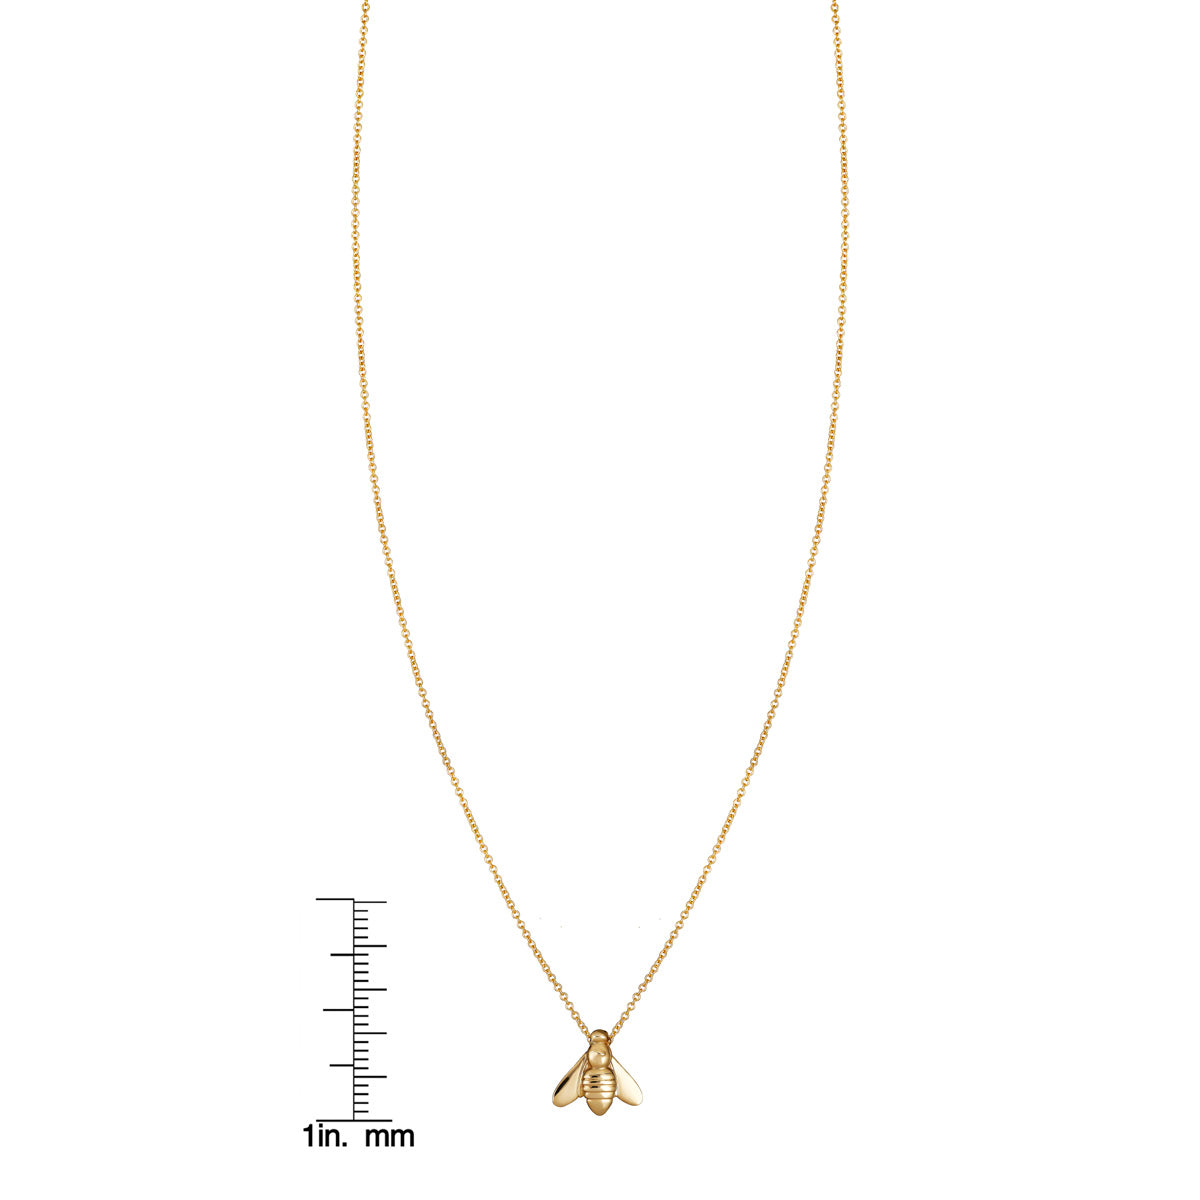 14k gold bhoney bee necklace (PRN066) with ruler, nature-inspired jewelry.